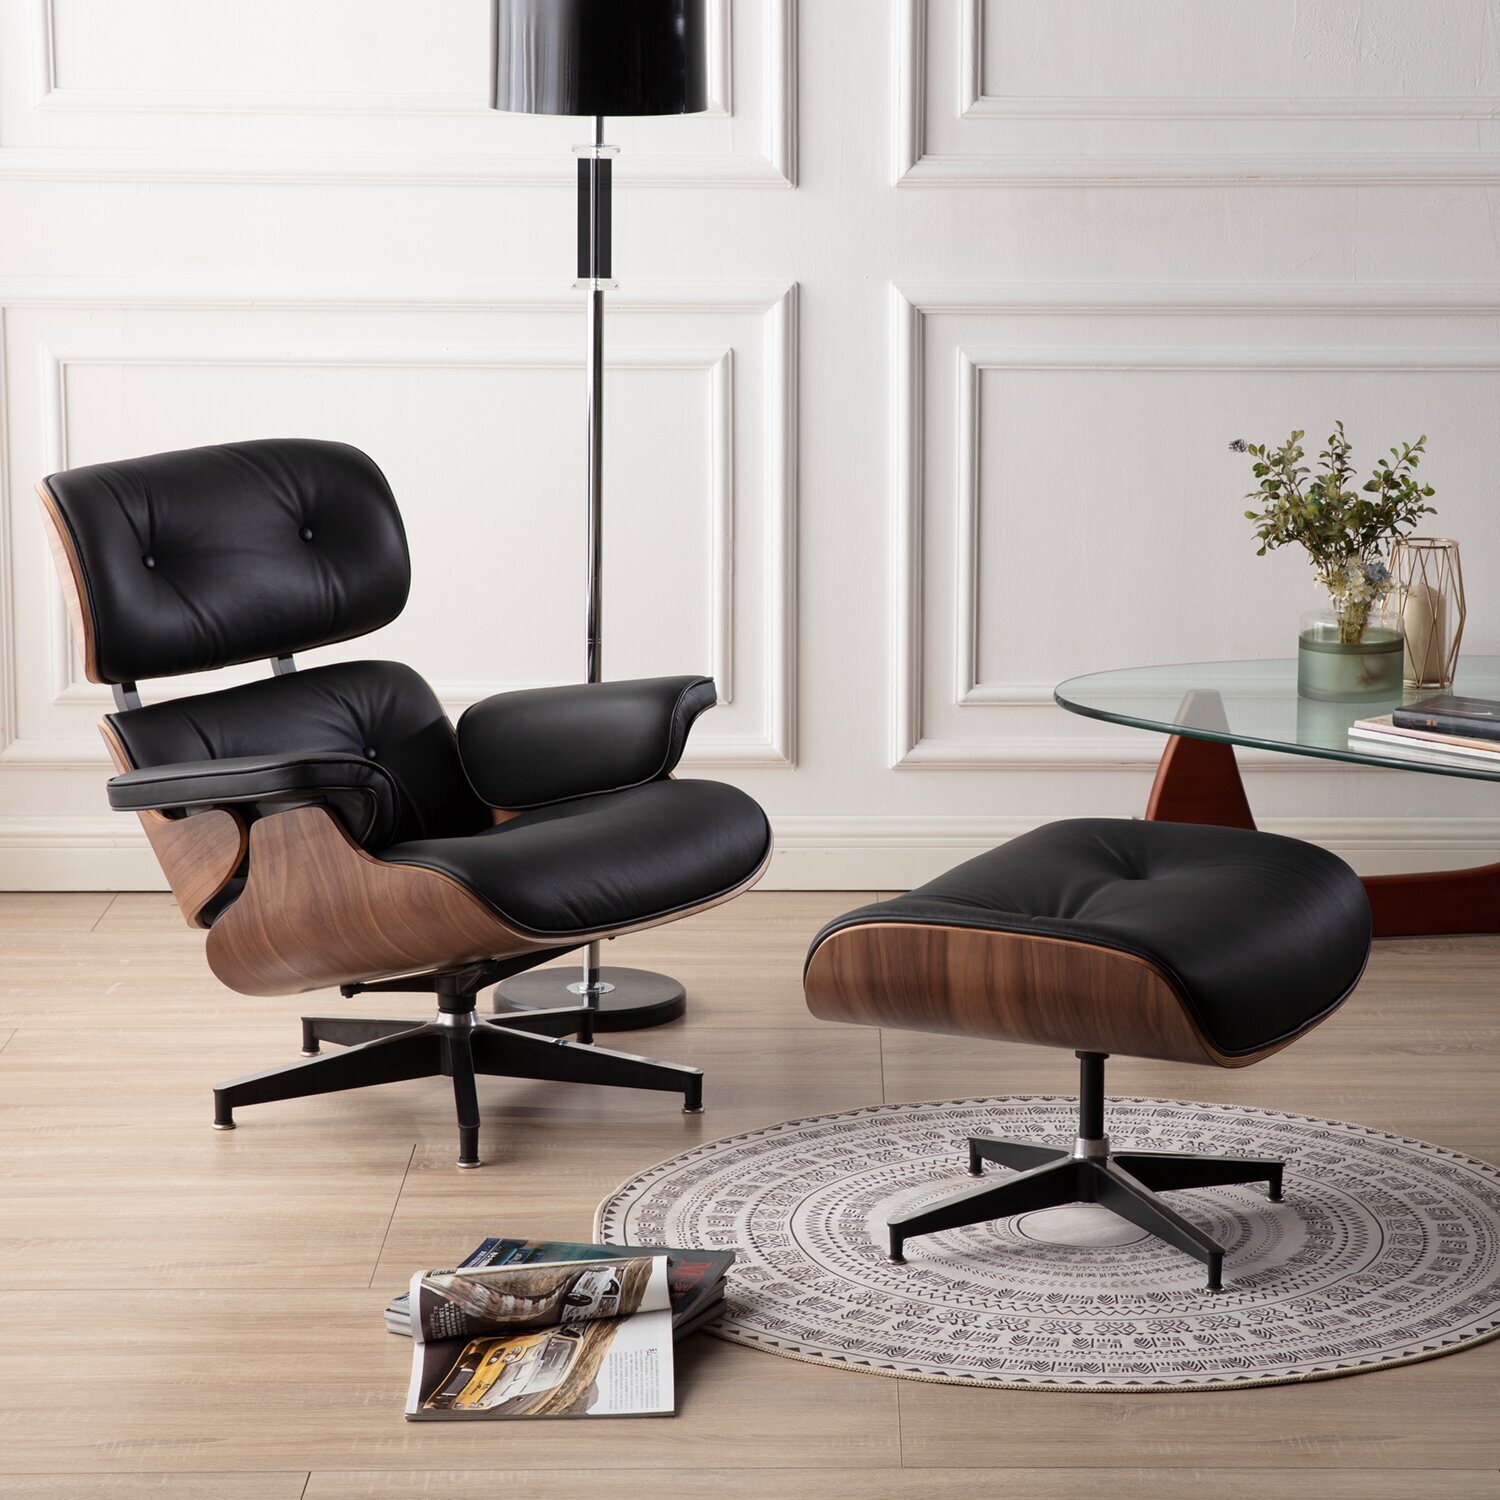 A Wood and Leather Swedish Chair and Ottoman